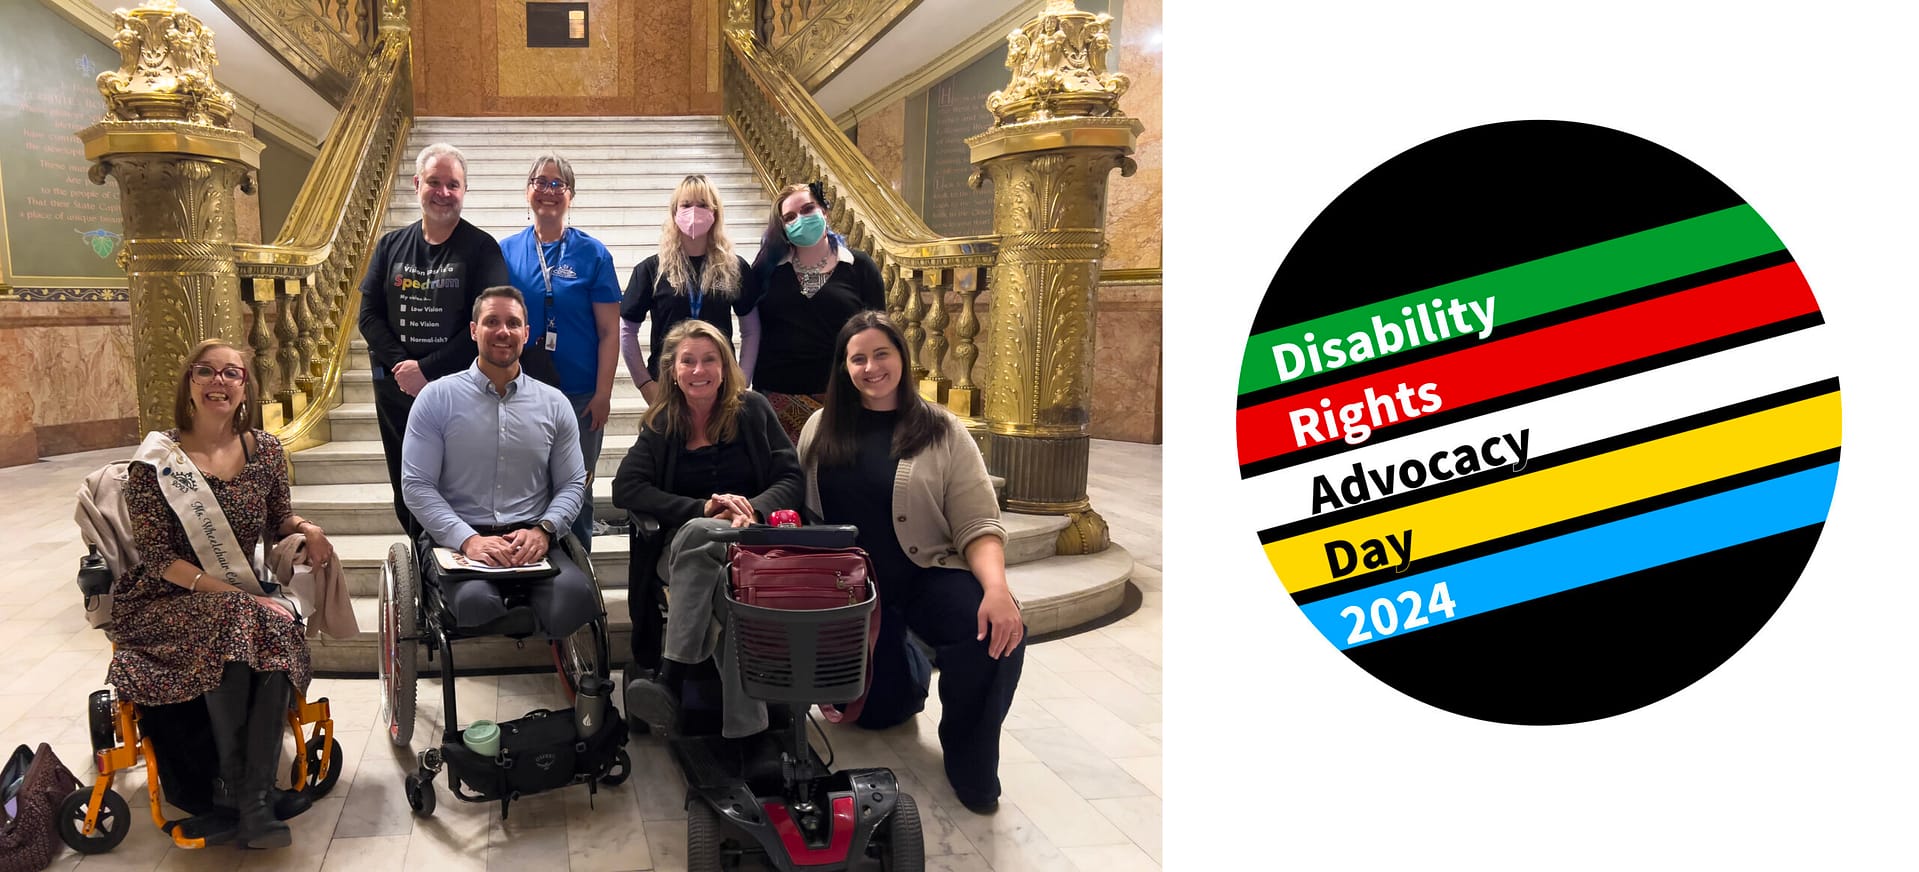 Members of the staff of CPWD and consumers stand at the foot of the stairs inside the rotunda of the Colorado State Capitol. To the right of the image is the logo for Disability Rights Advocacy Day.